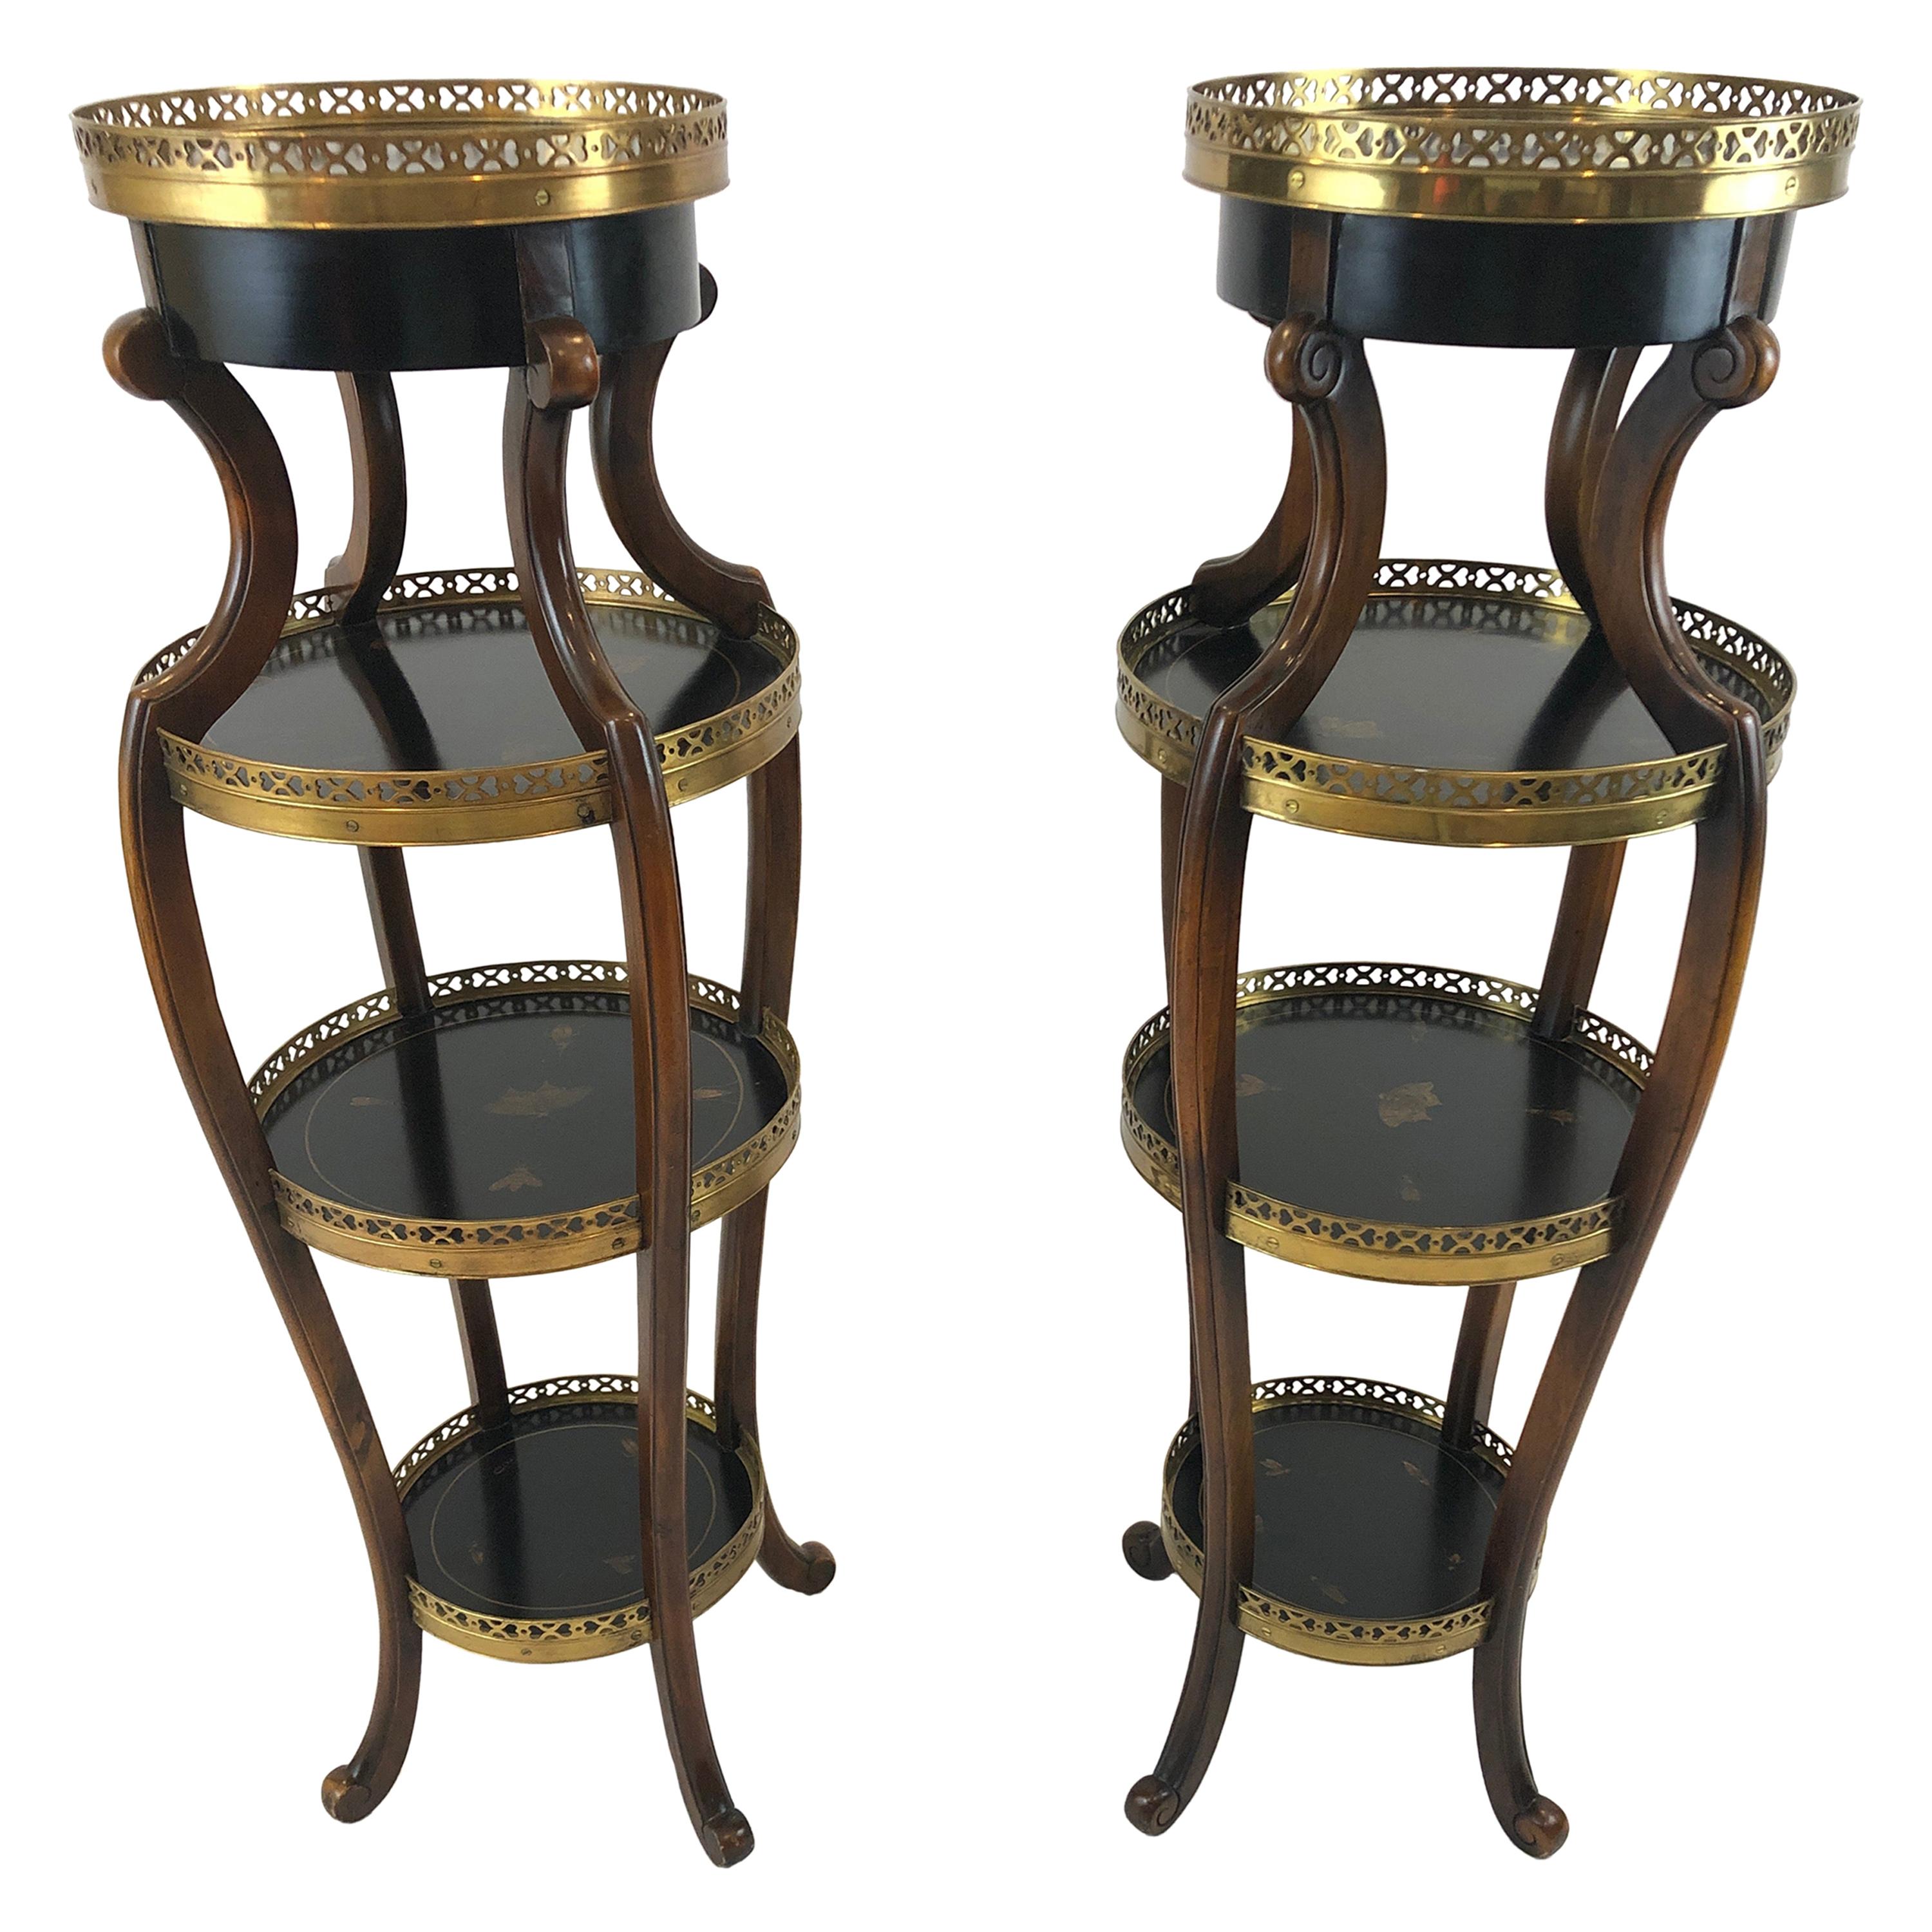 Pair of Dramatic Theodore Alexander Hand Painted Ebonized Wood and Brass Stands